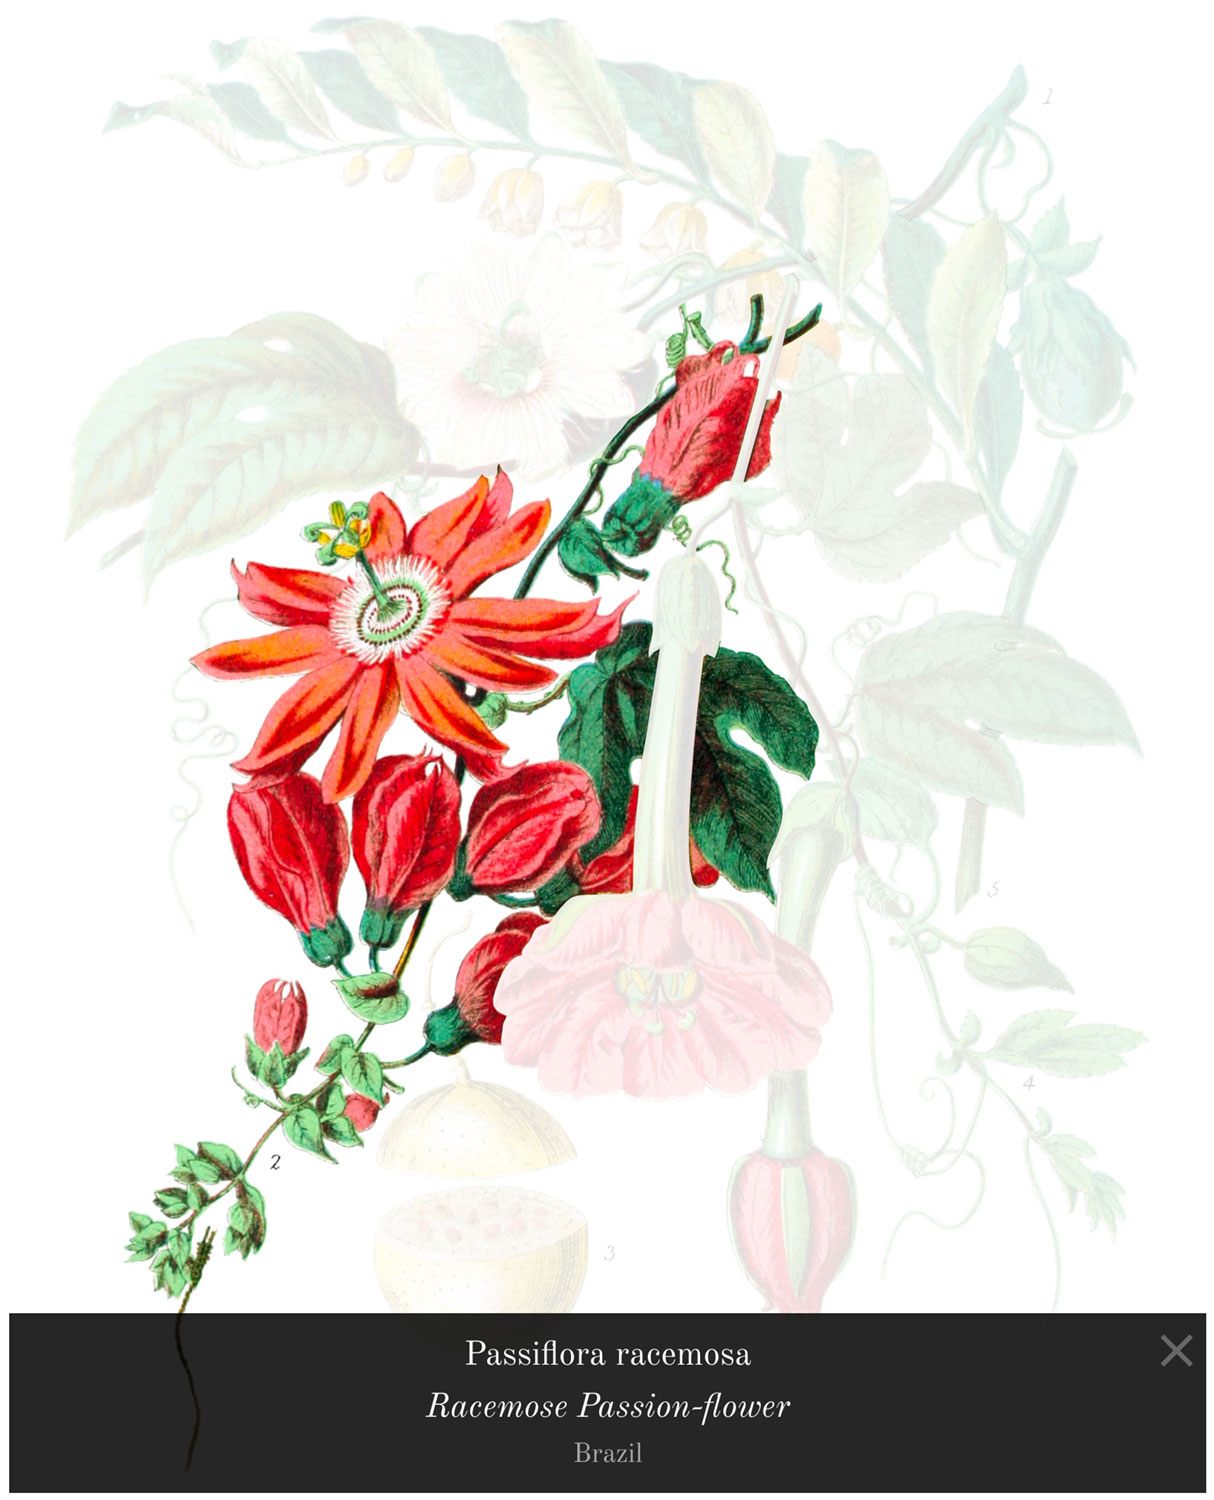 Passiflora racemosa from the passion-flower tribe highlighted with popup caption